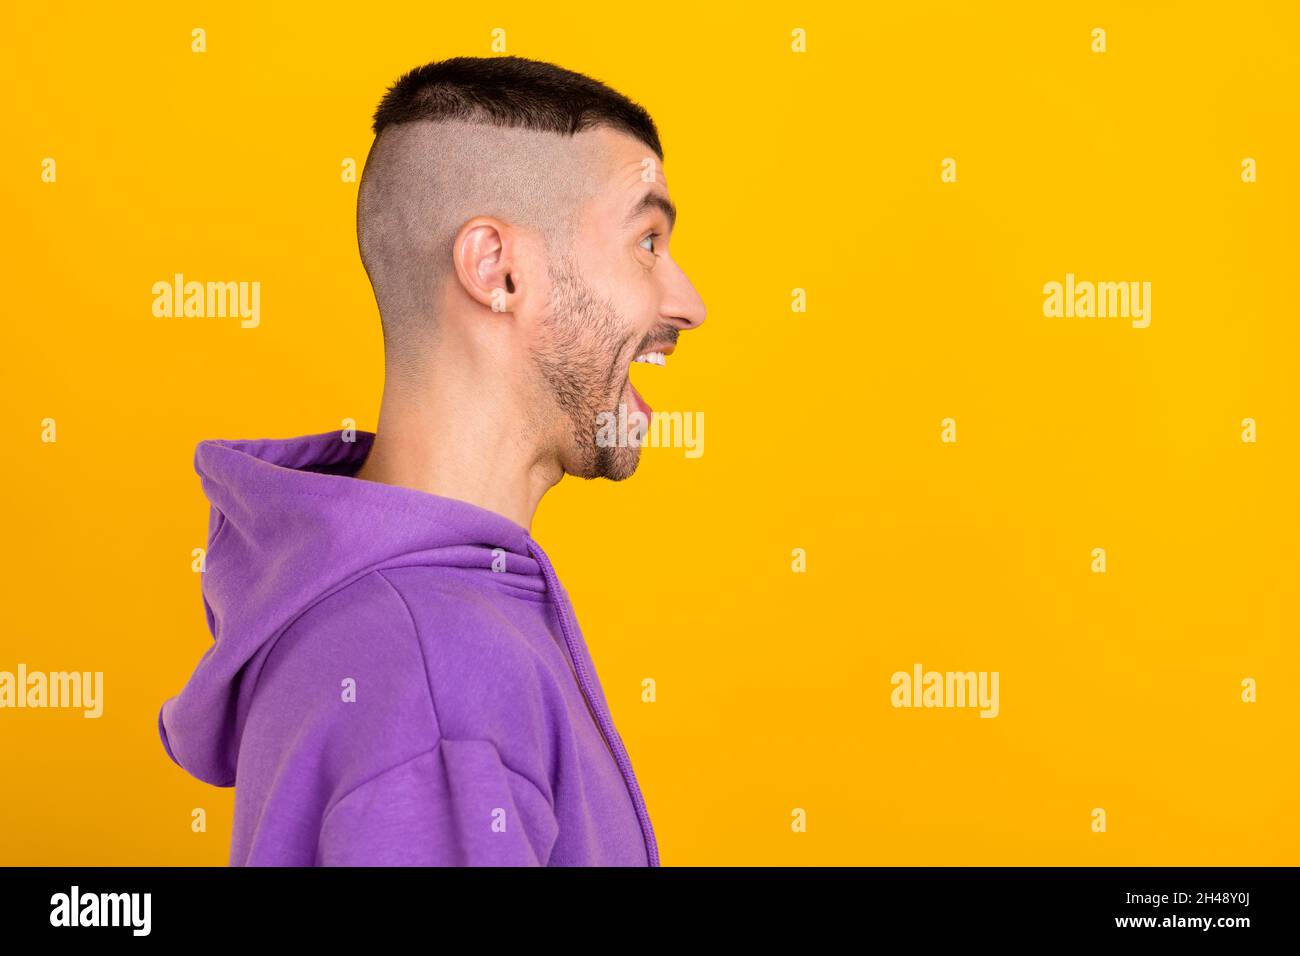 Photo portrait young man wearing purple hoody looking copyspace shouting isolated vivid yellow color background Stock Photo